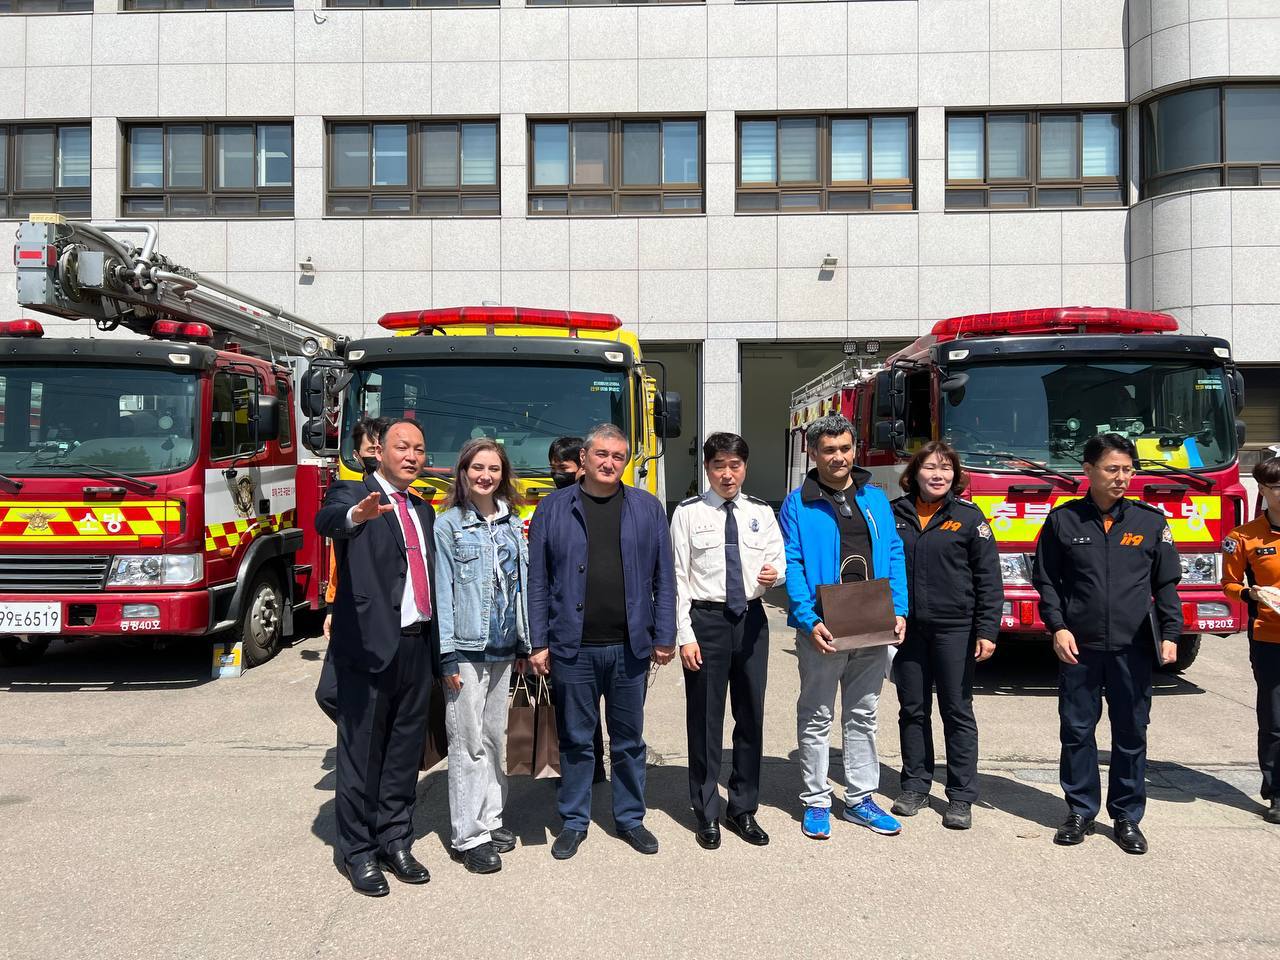 REPRESENTATIVES OF OUR INSTITUTE GOT ACQUAINTED THE “JEUNG PYEONG” FIRE FIGHTING CENTER OF KOREA